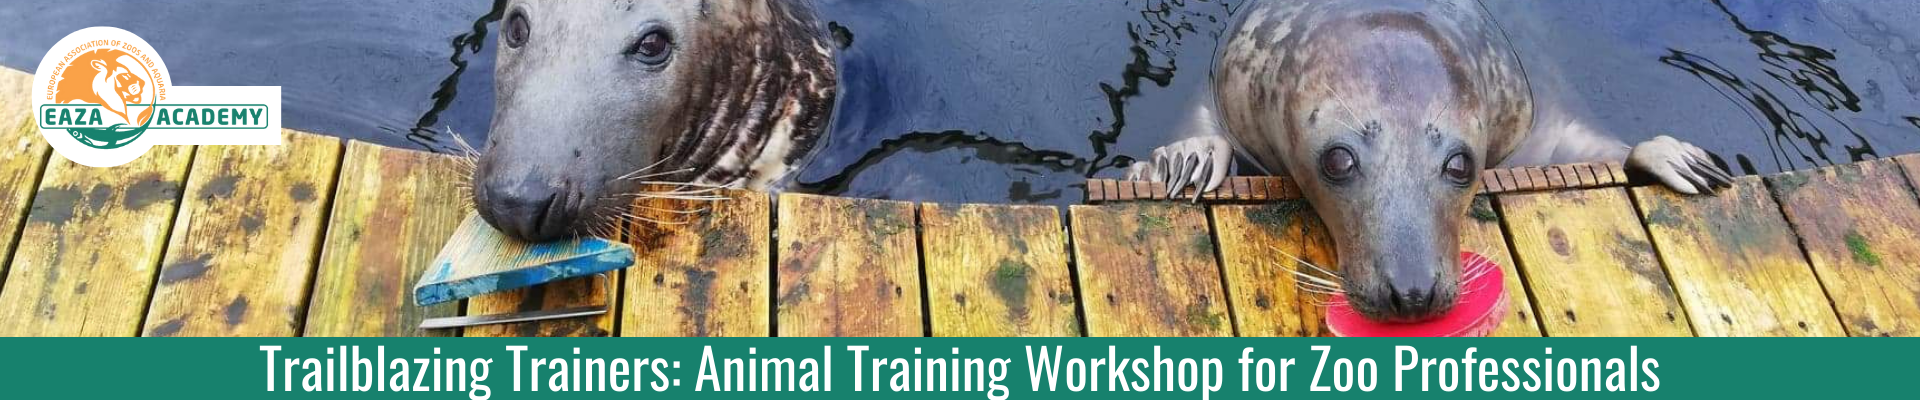 Trailblazing Trainers: Animal Training Workshop for Zoo Professionals